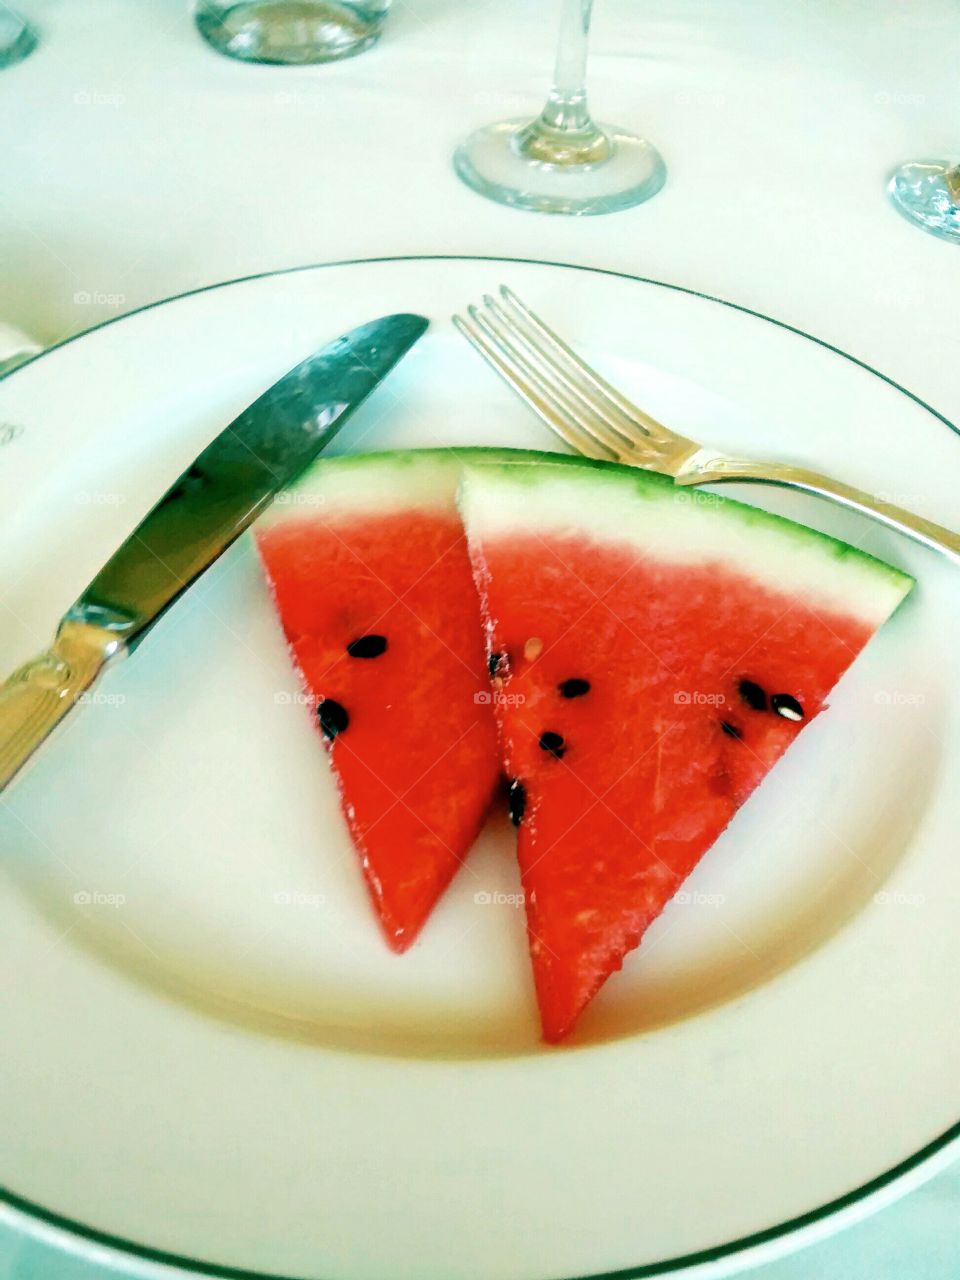 Watermelon luxury. delicious watermelon slices in a luxurious restaurant ... the silver cutlery stand pure freshness of seasonal fruits